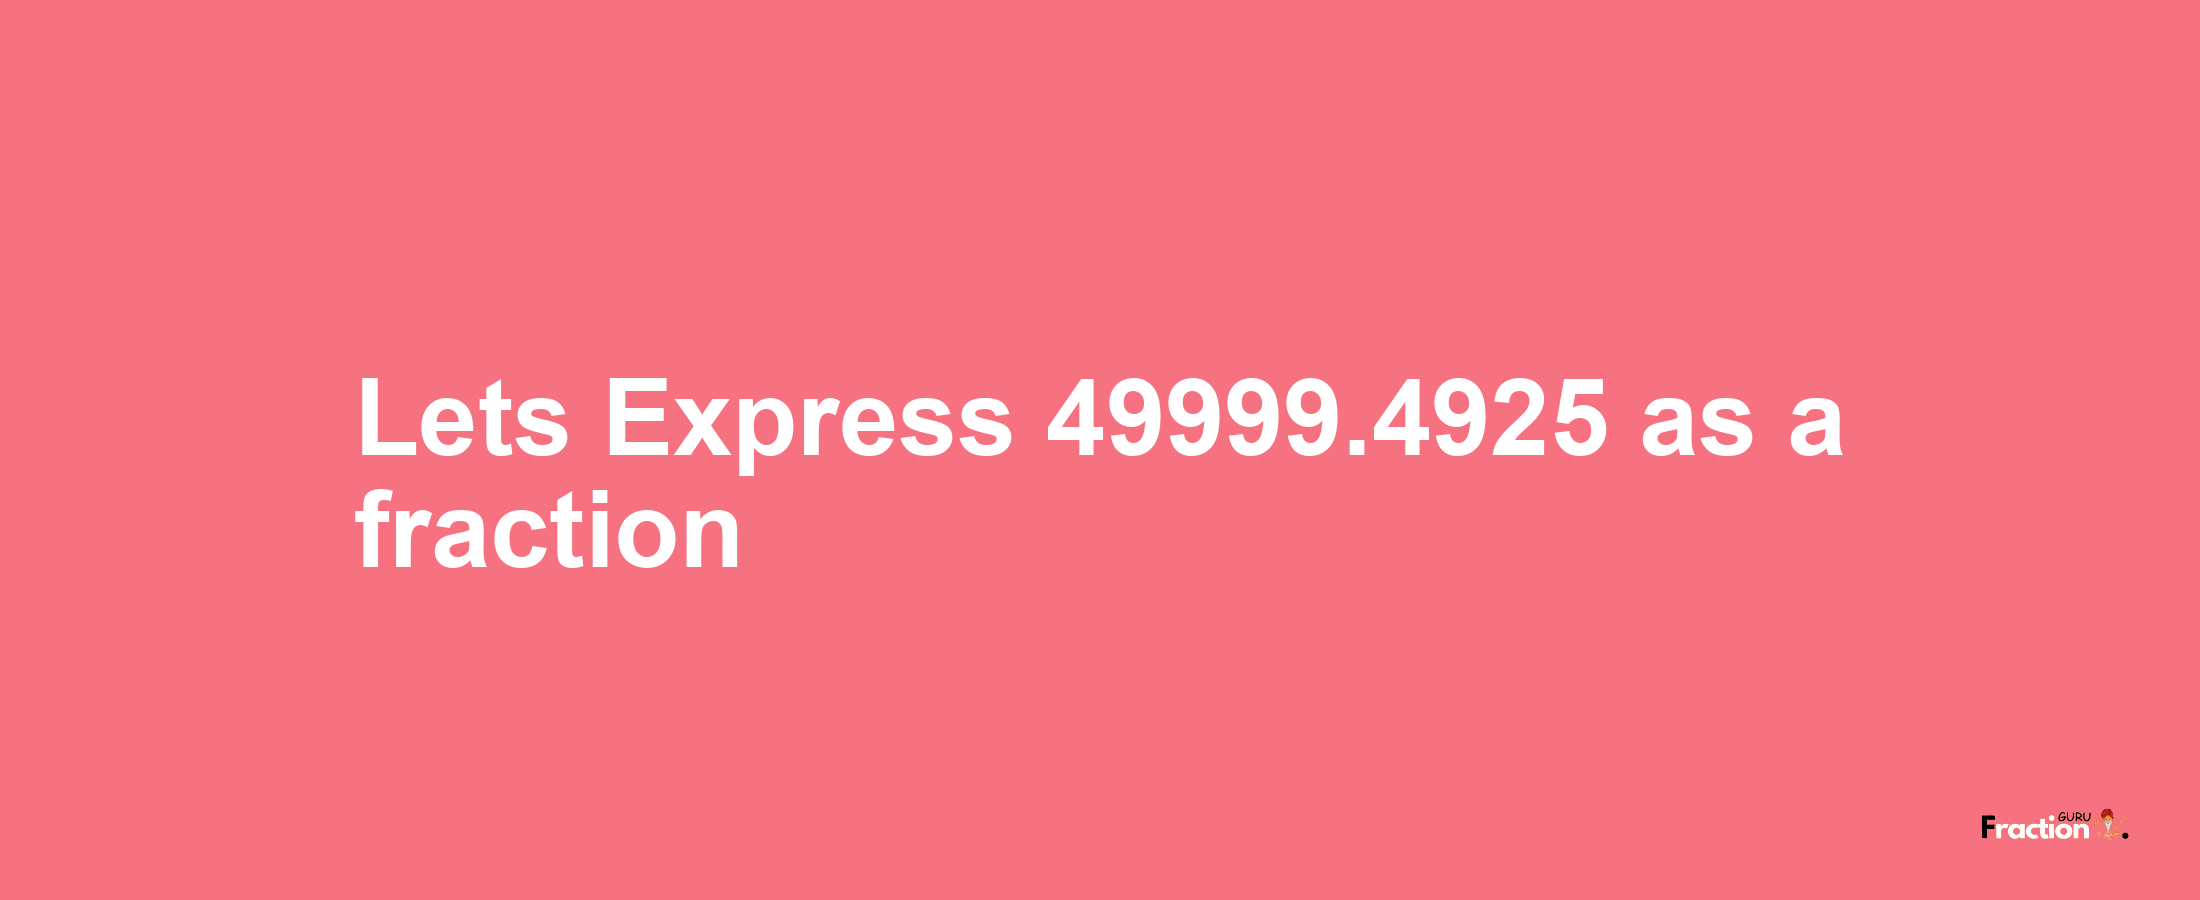 Lets Express 49999.4925 as afraction